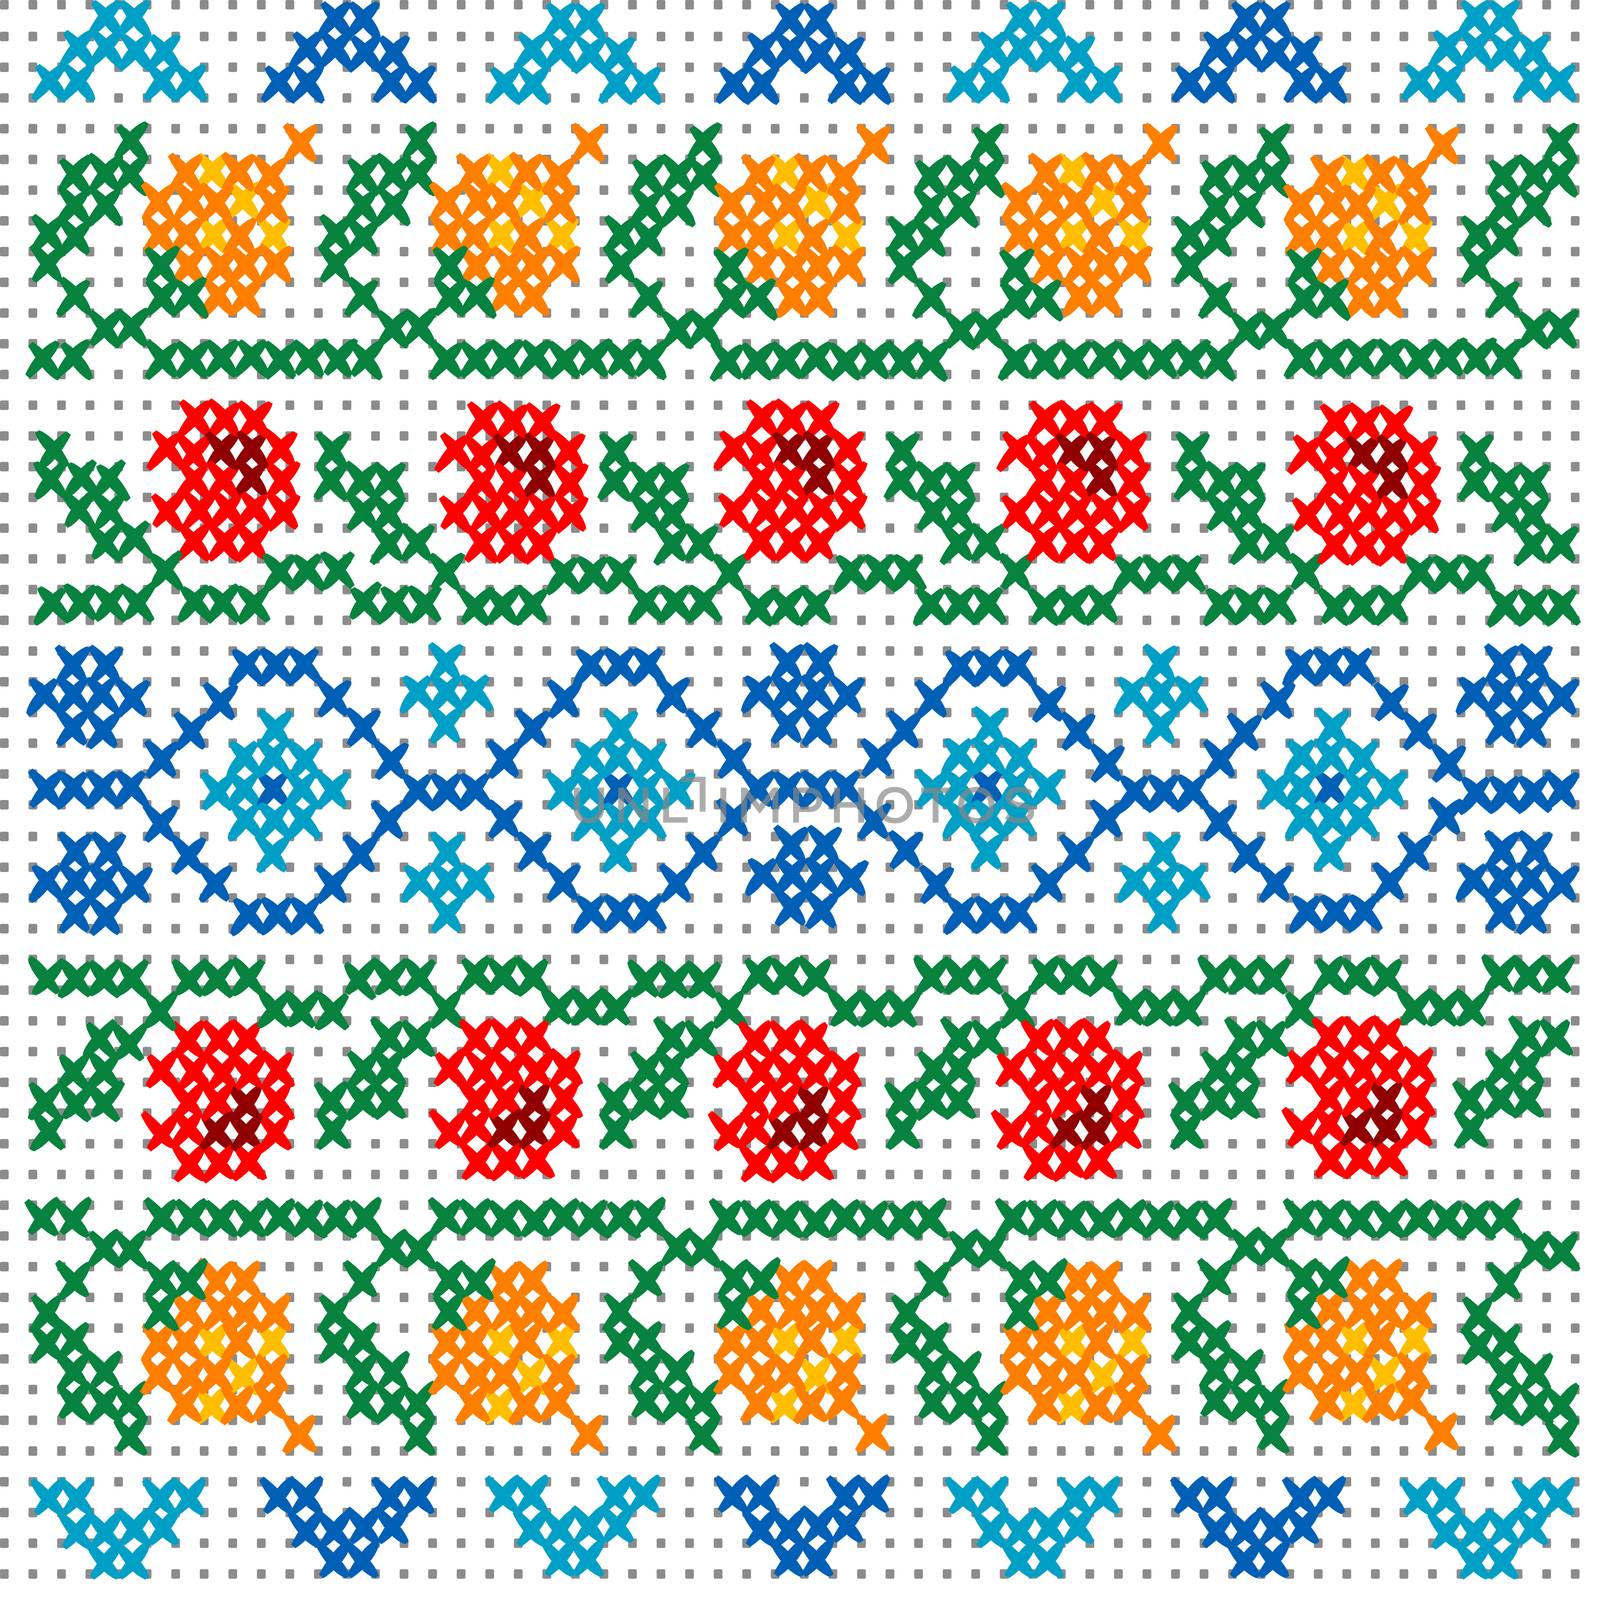 Cross stitch pattern for clothing with elements of folk embroide by hibrida13